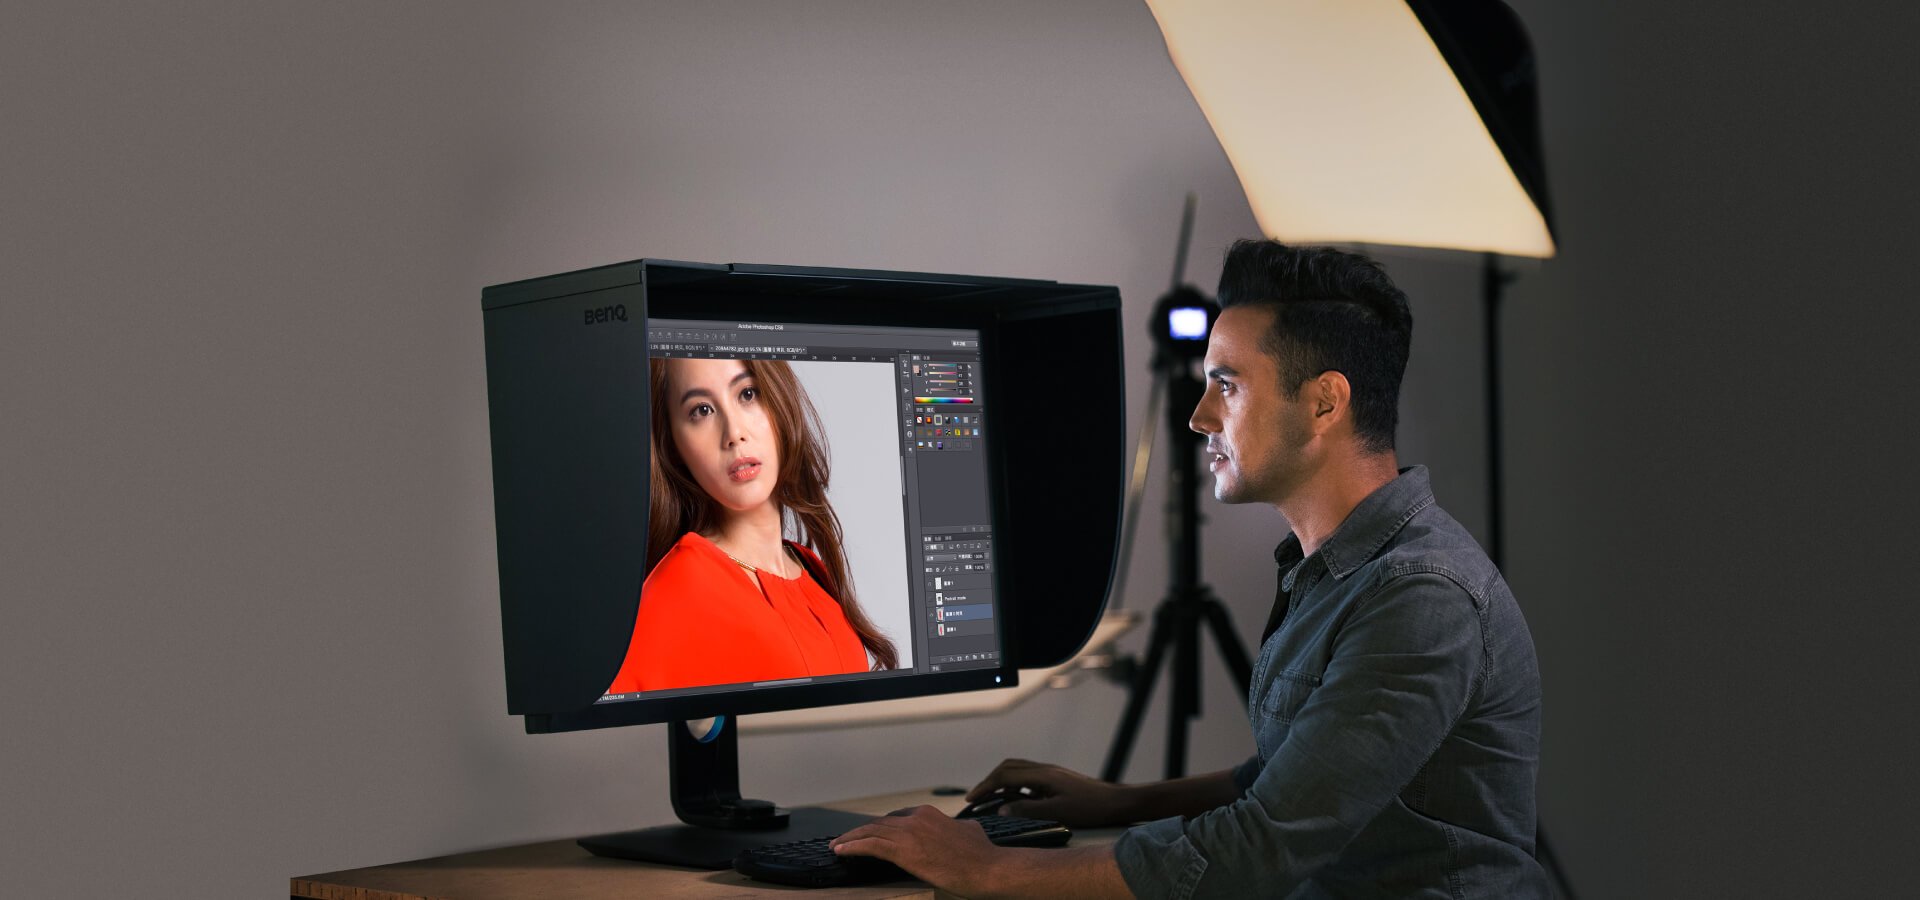 The SW2700PT includes a detachable shading hood that effectively reduces screen glare from ambient lighting, bringing top quality of color accuracy required for  professional work.